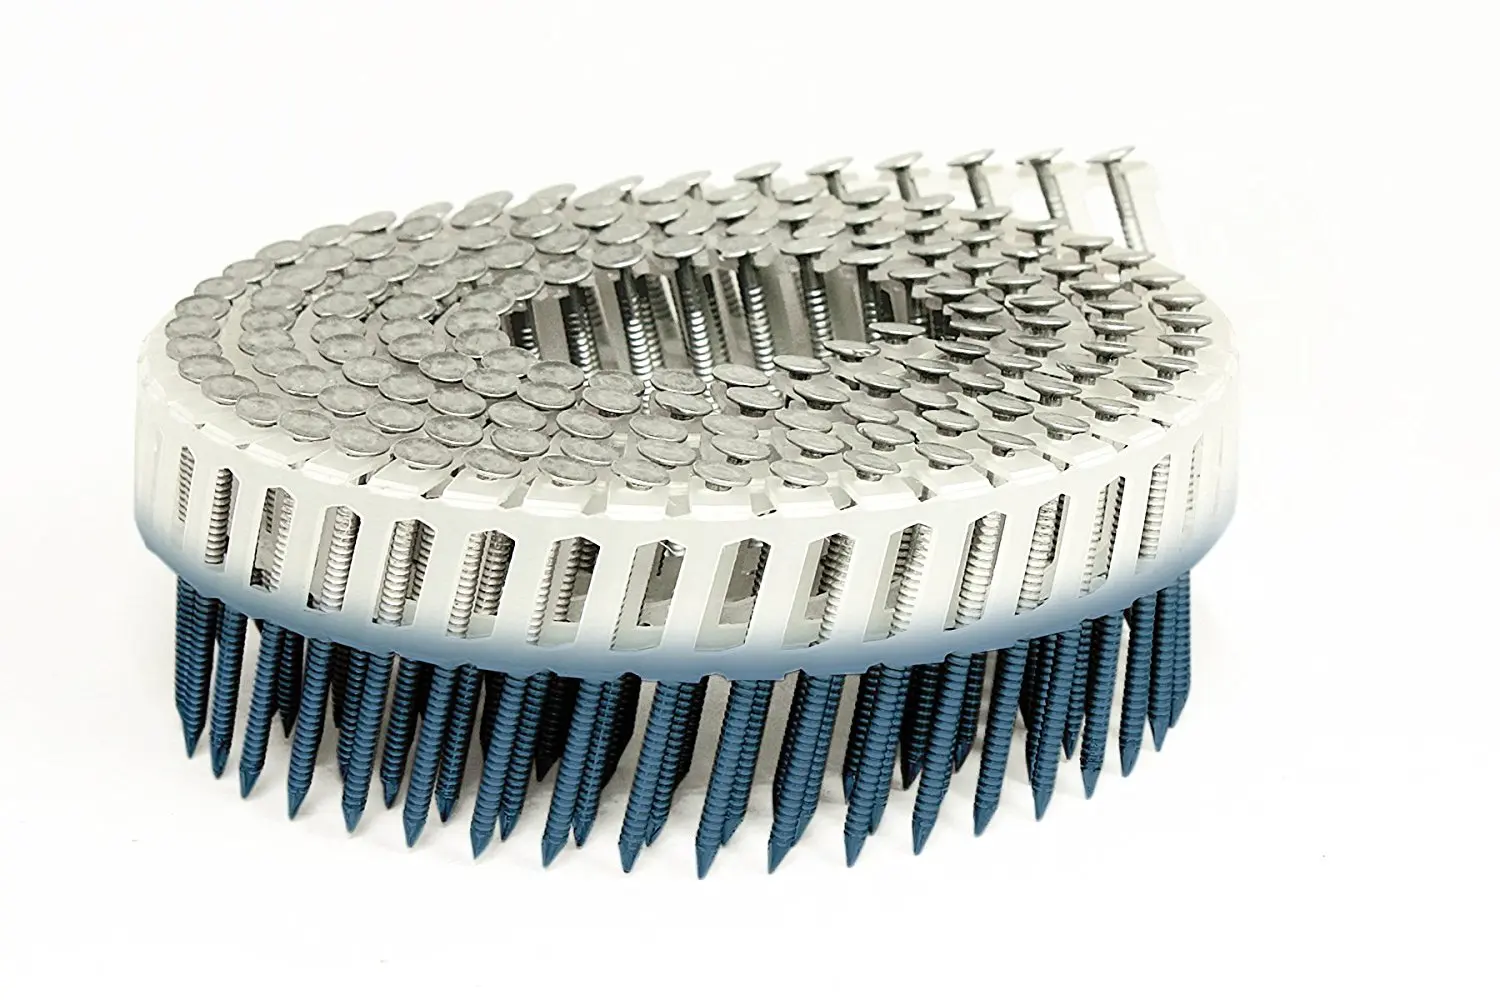 Co Sold as 1 PK 1//2amp;quot; 100//PK Fellowes Mfg Use with any standard 19-ring comb-binding s Products 90 Sheet Capacity Plastic Comb Bindings WE Versatile plastic comb binding gives a professional appearance to bound reports and presentations